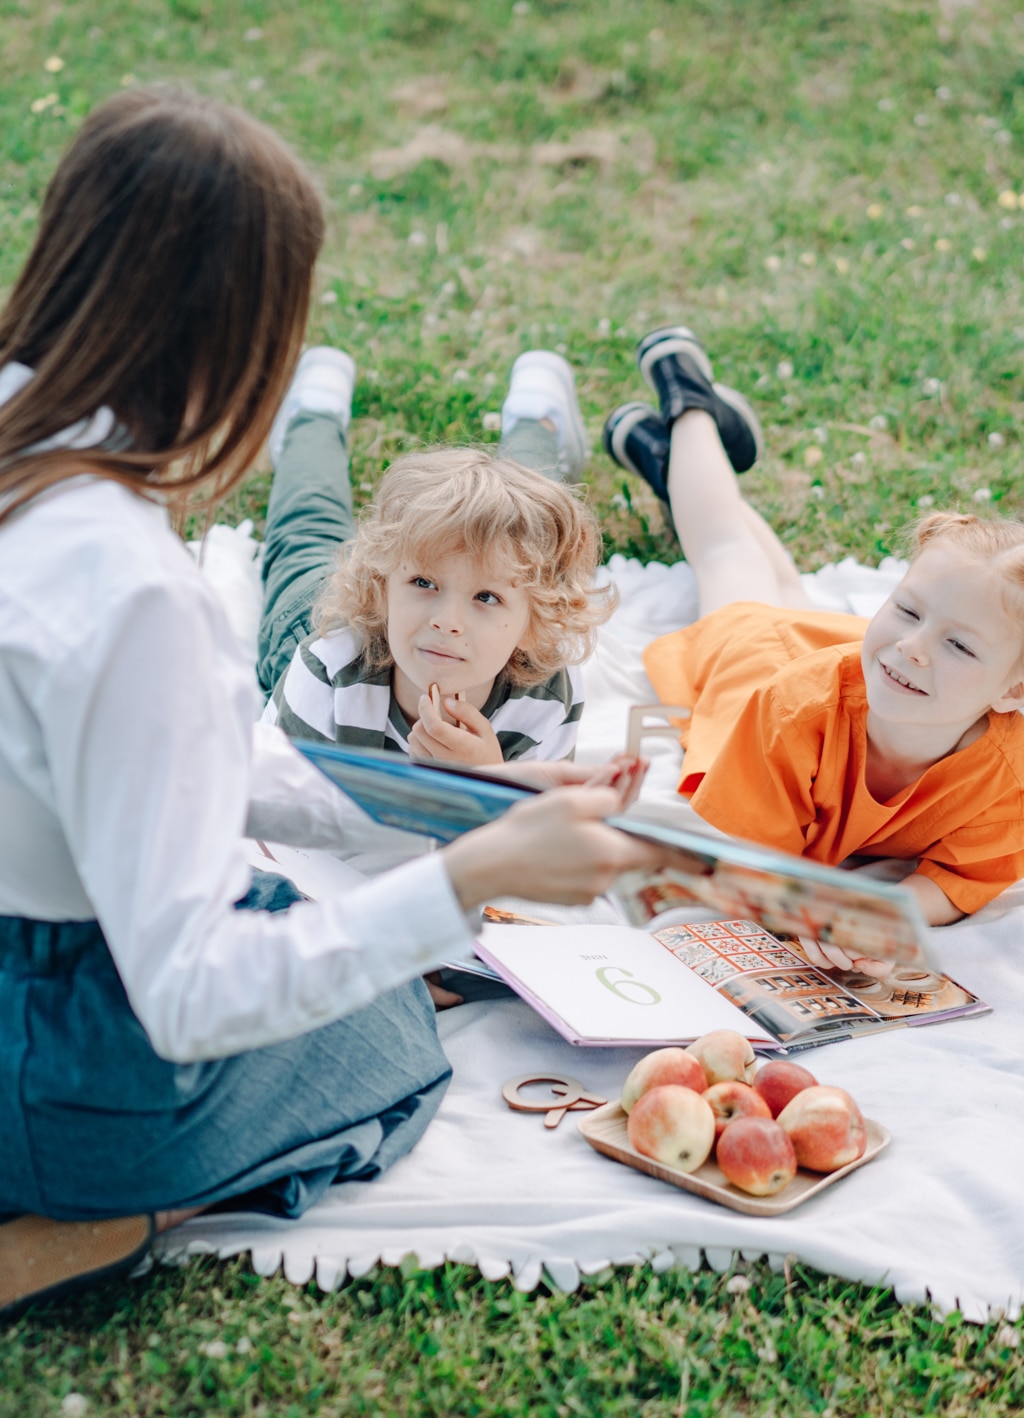 In countries where the summer holiday between school years is on the longer side, many families opt for a short-stay summer au pair who comes for approximately 3 months to au pair for the host family. Summer au pairing is most common in the south of Europe in Spain and Italy but could be an option in other countries that don't have a minimum stay requirement.